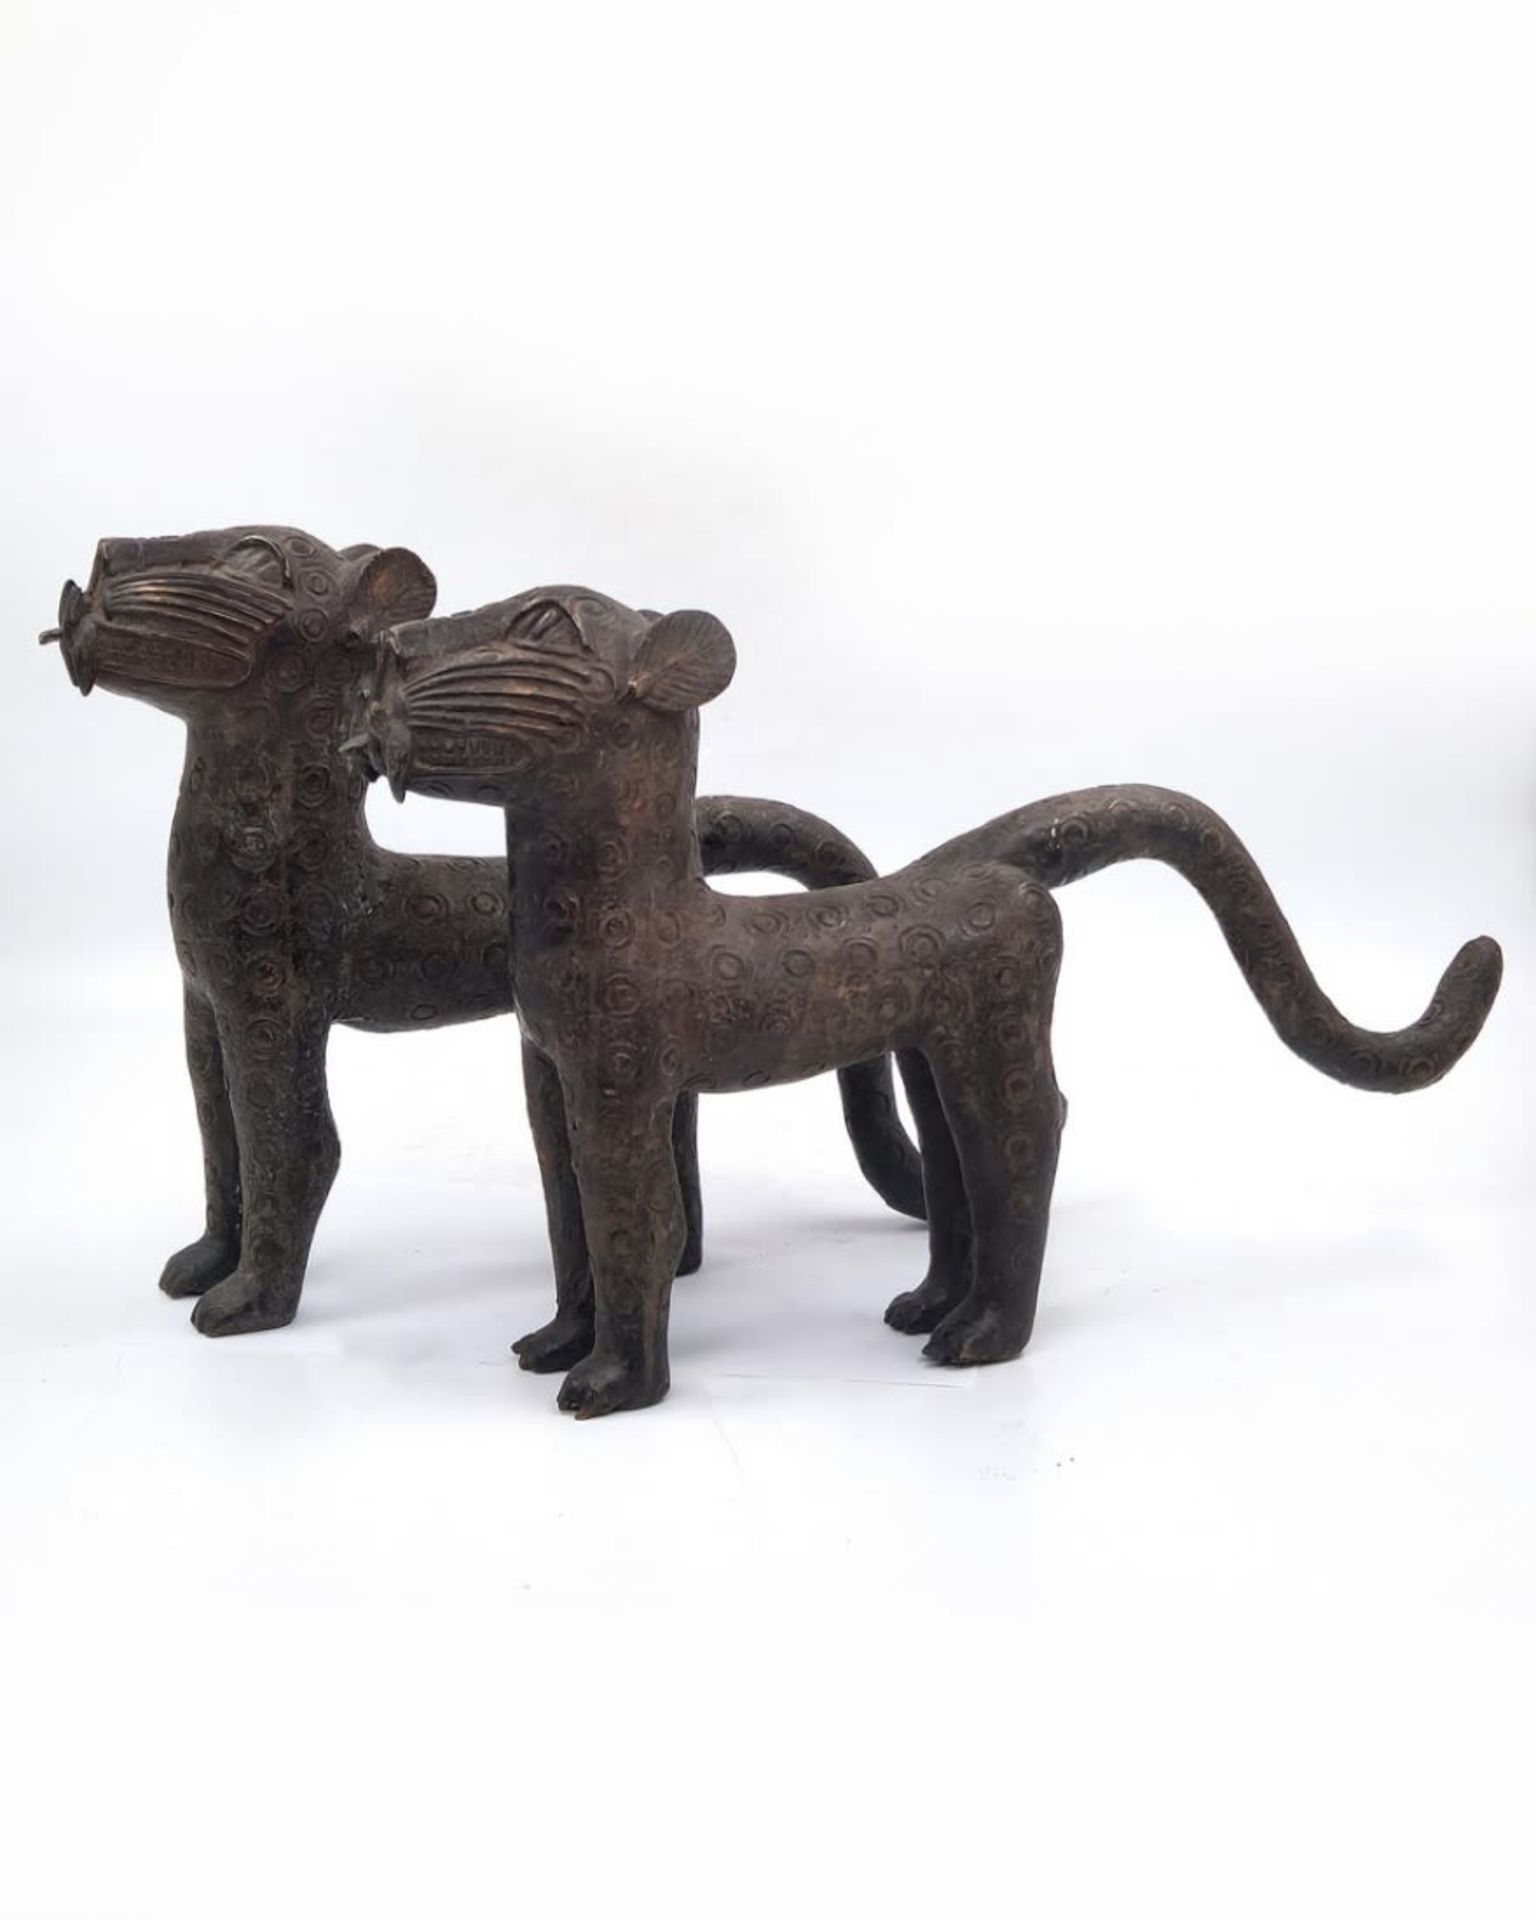 A pair of antique African statues, around hundred years old, in the form of panthers, made in ' - Bild 5 aus 8